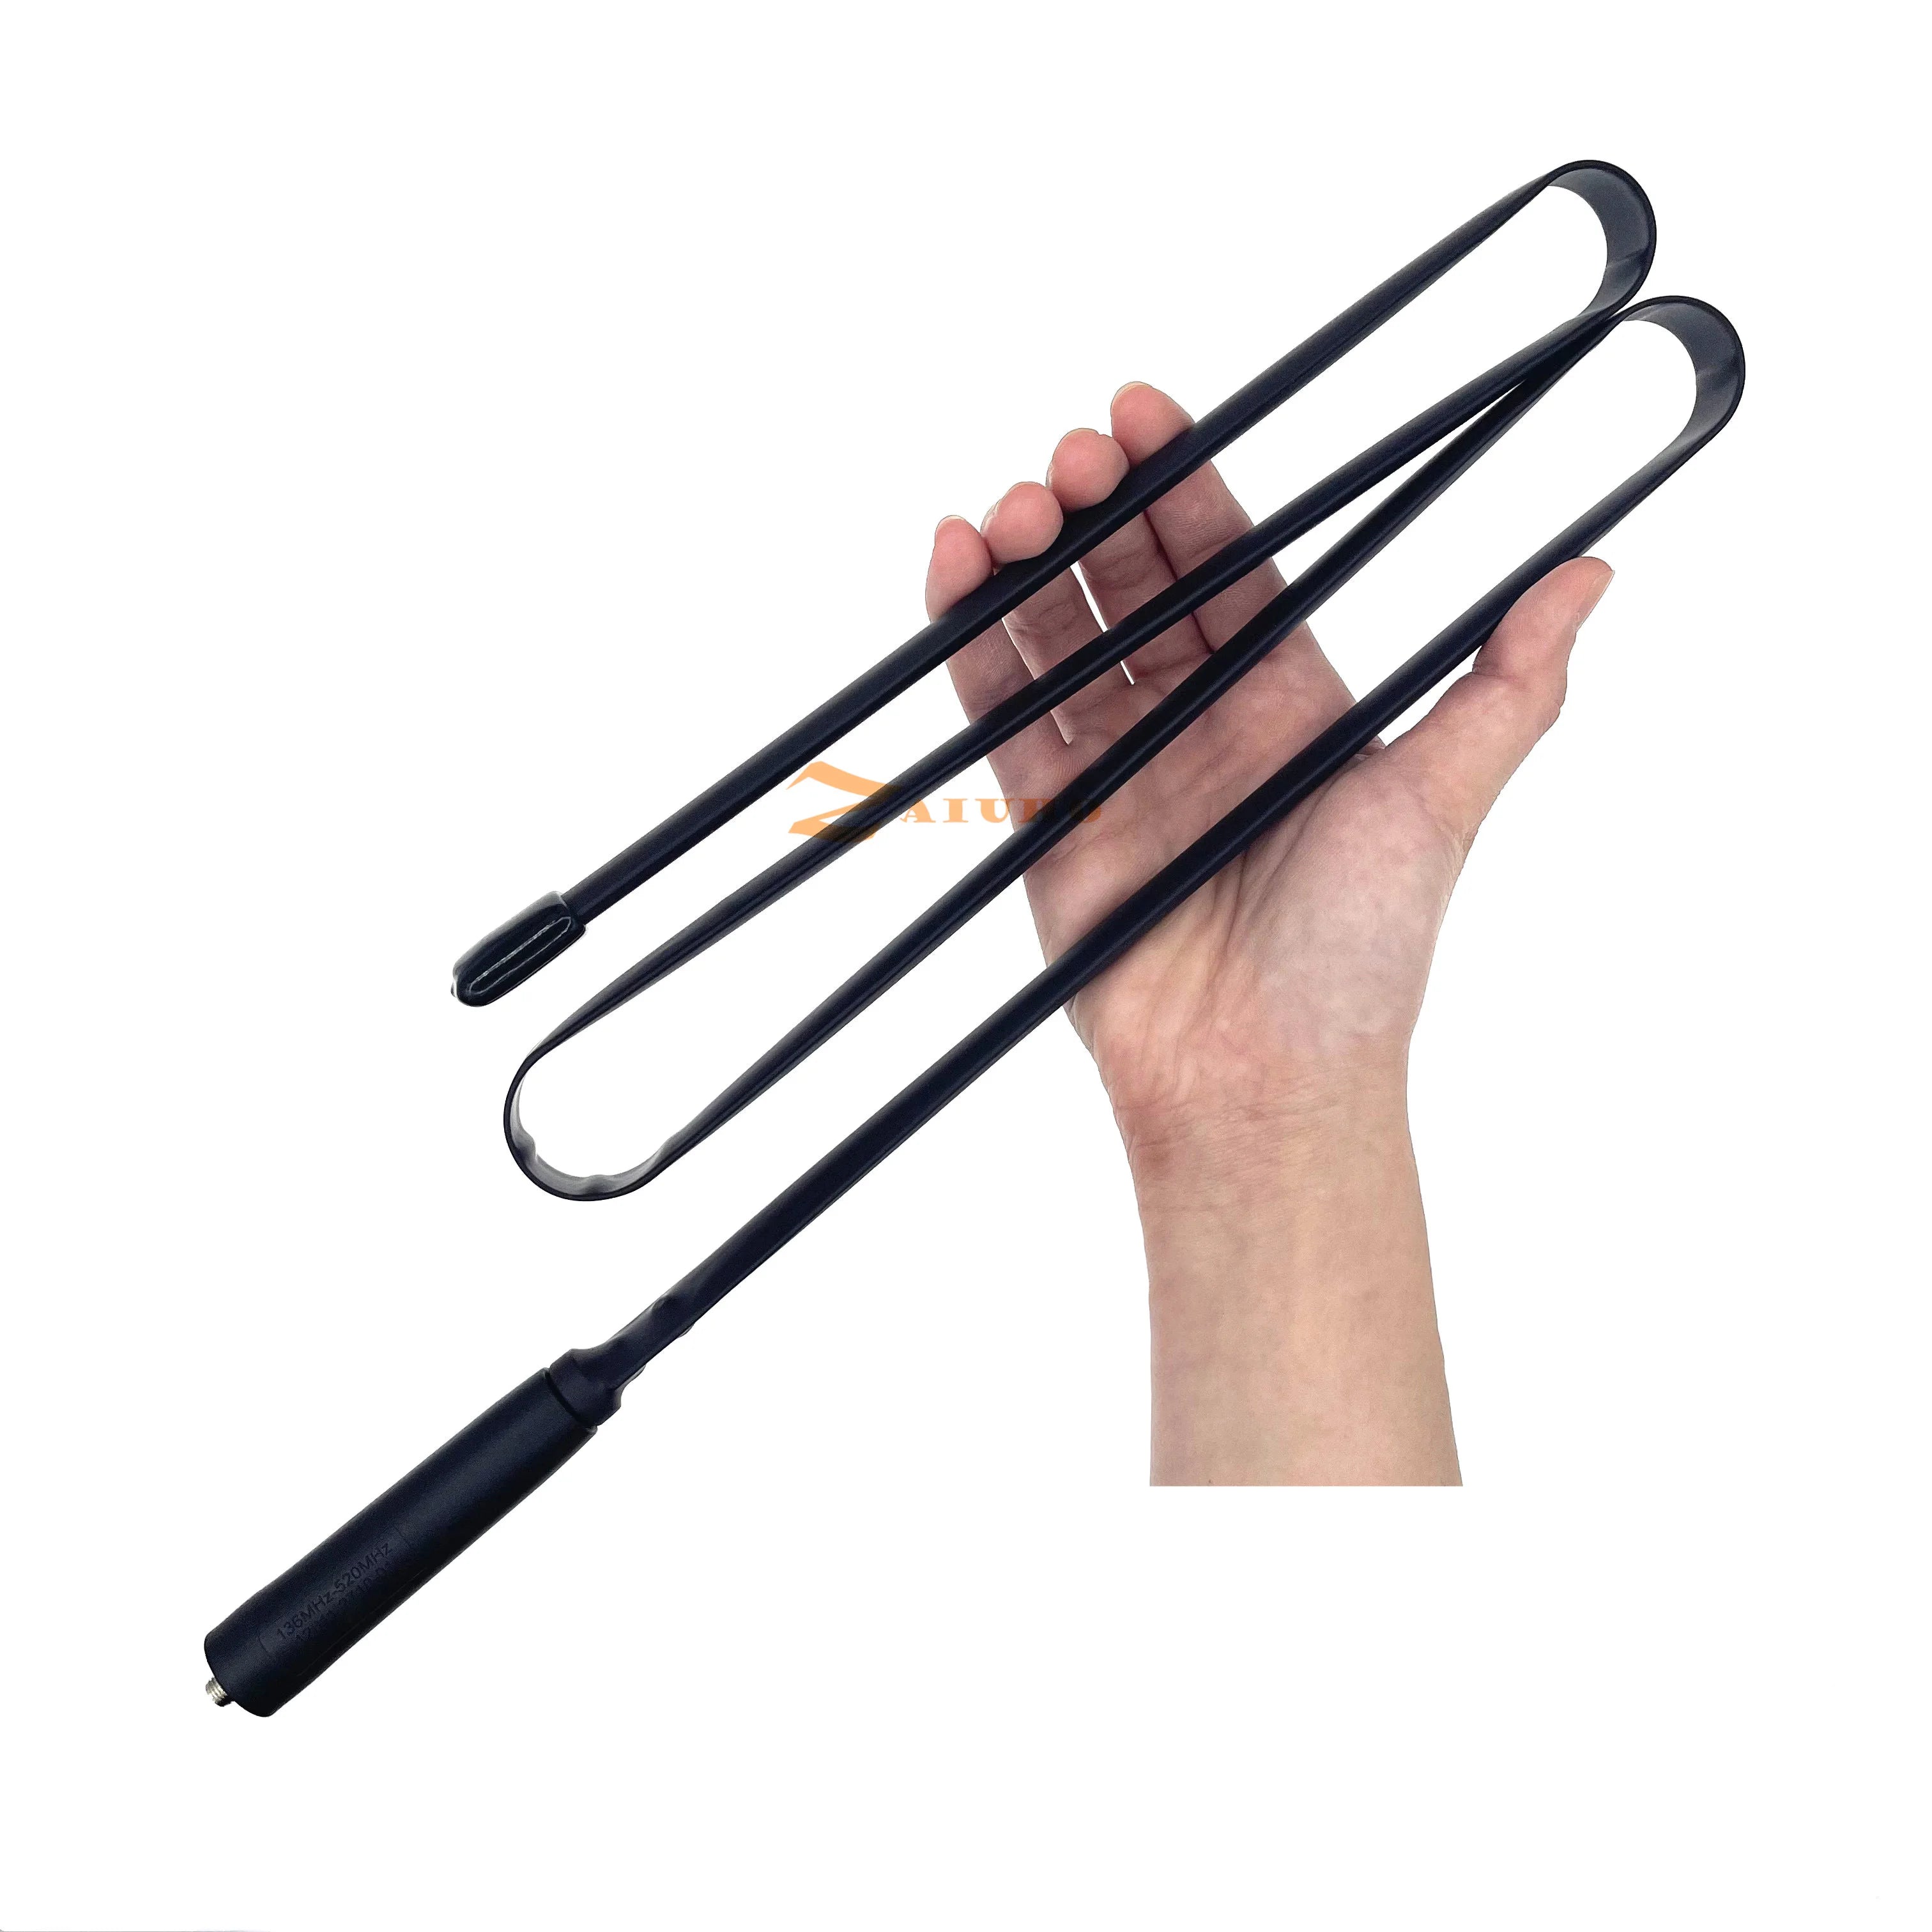 New Tactical SMA-F Foldable Antenna, We only ship to confirmed order addresses